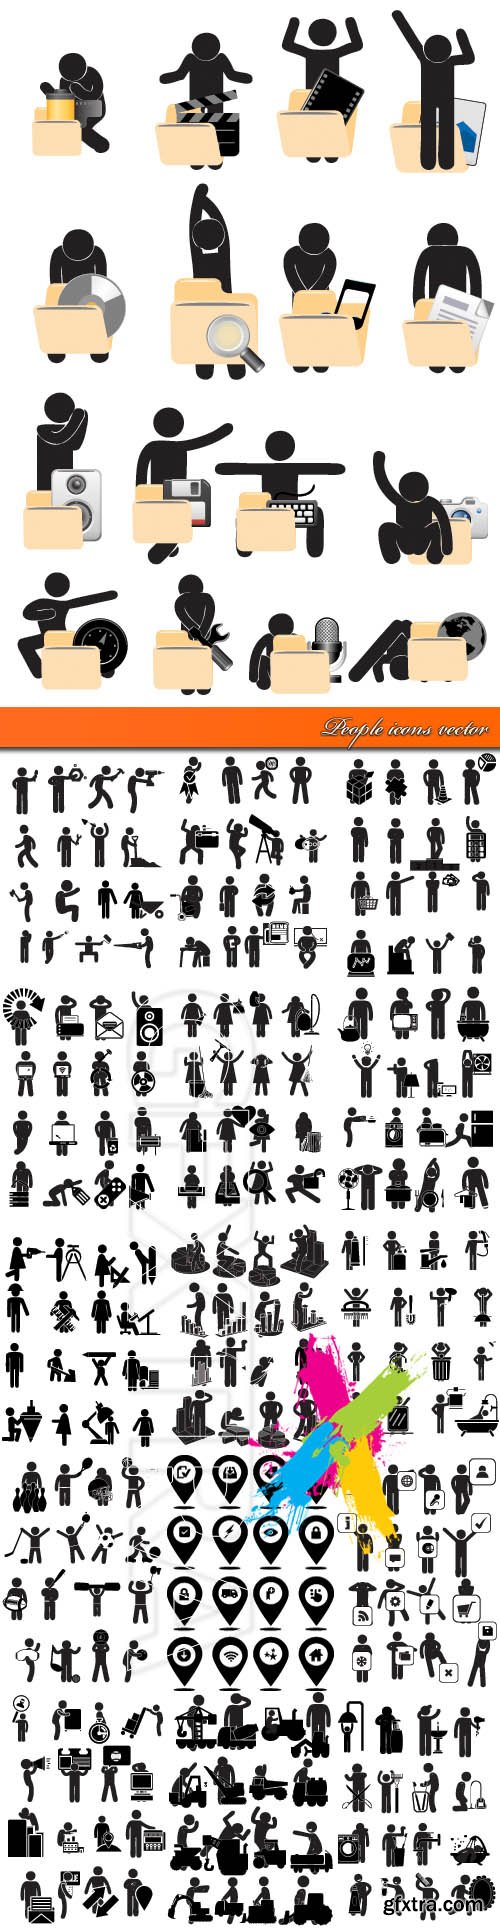 People icons vector